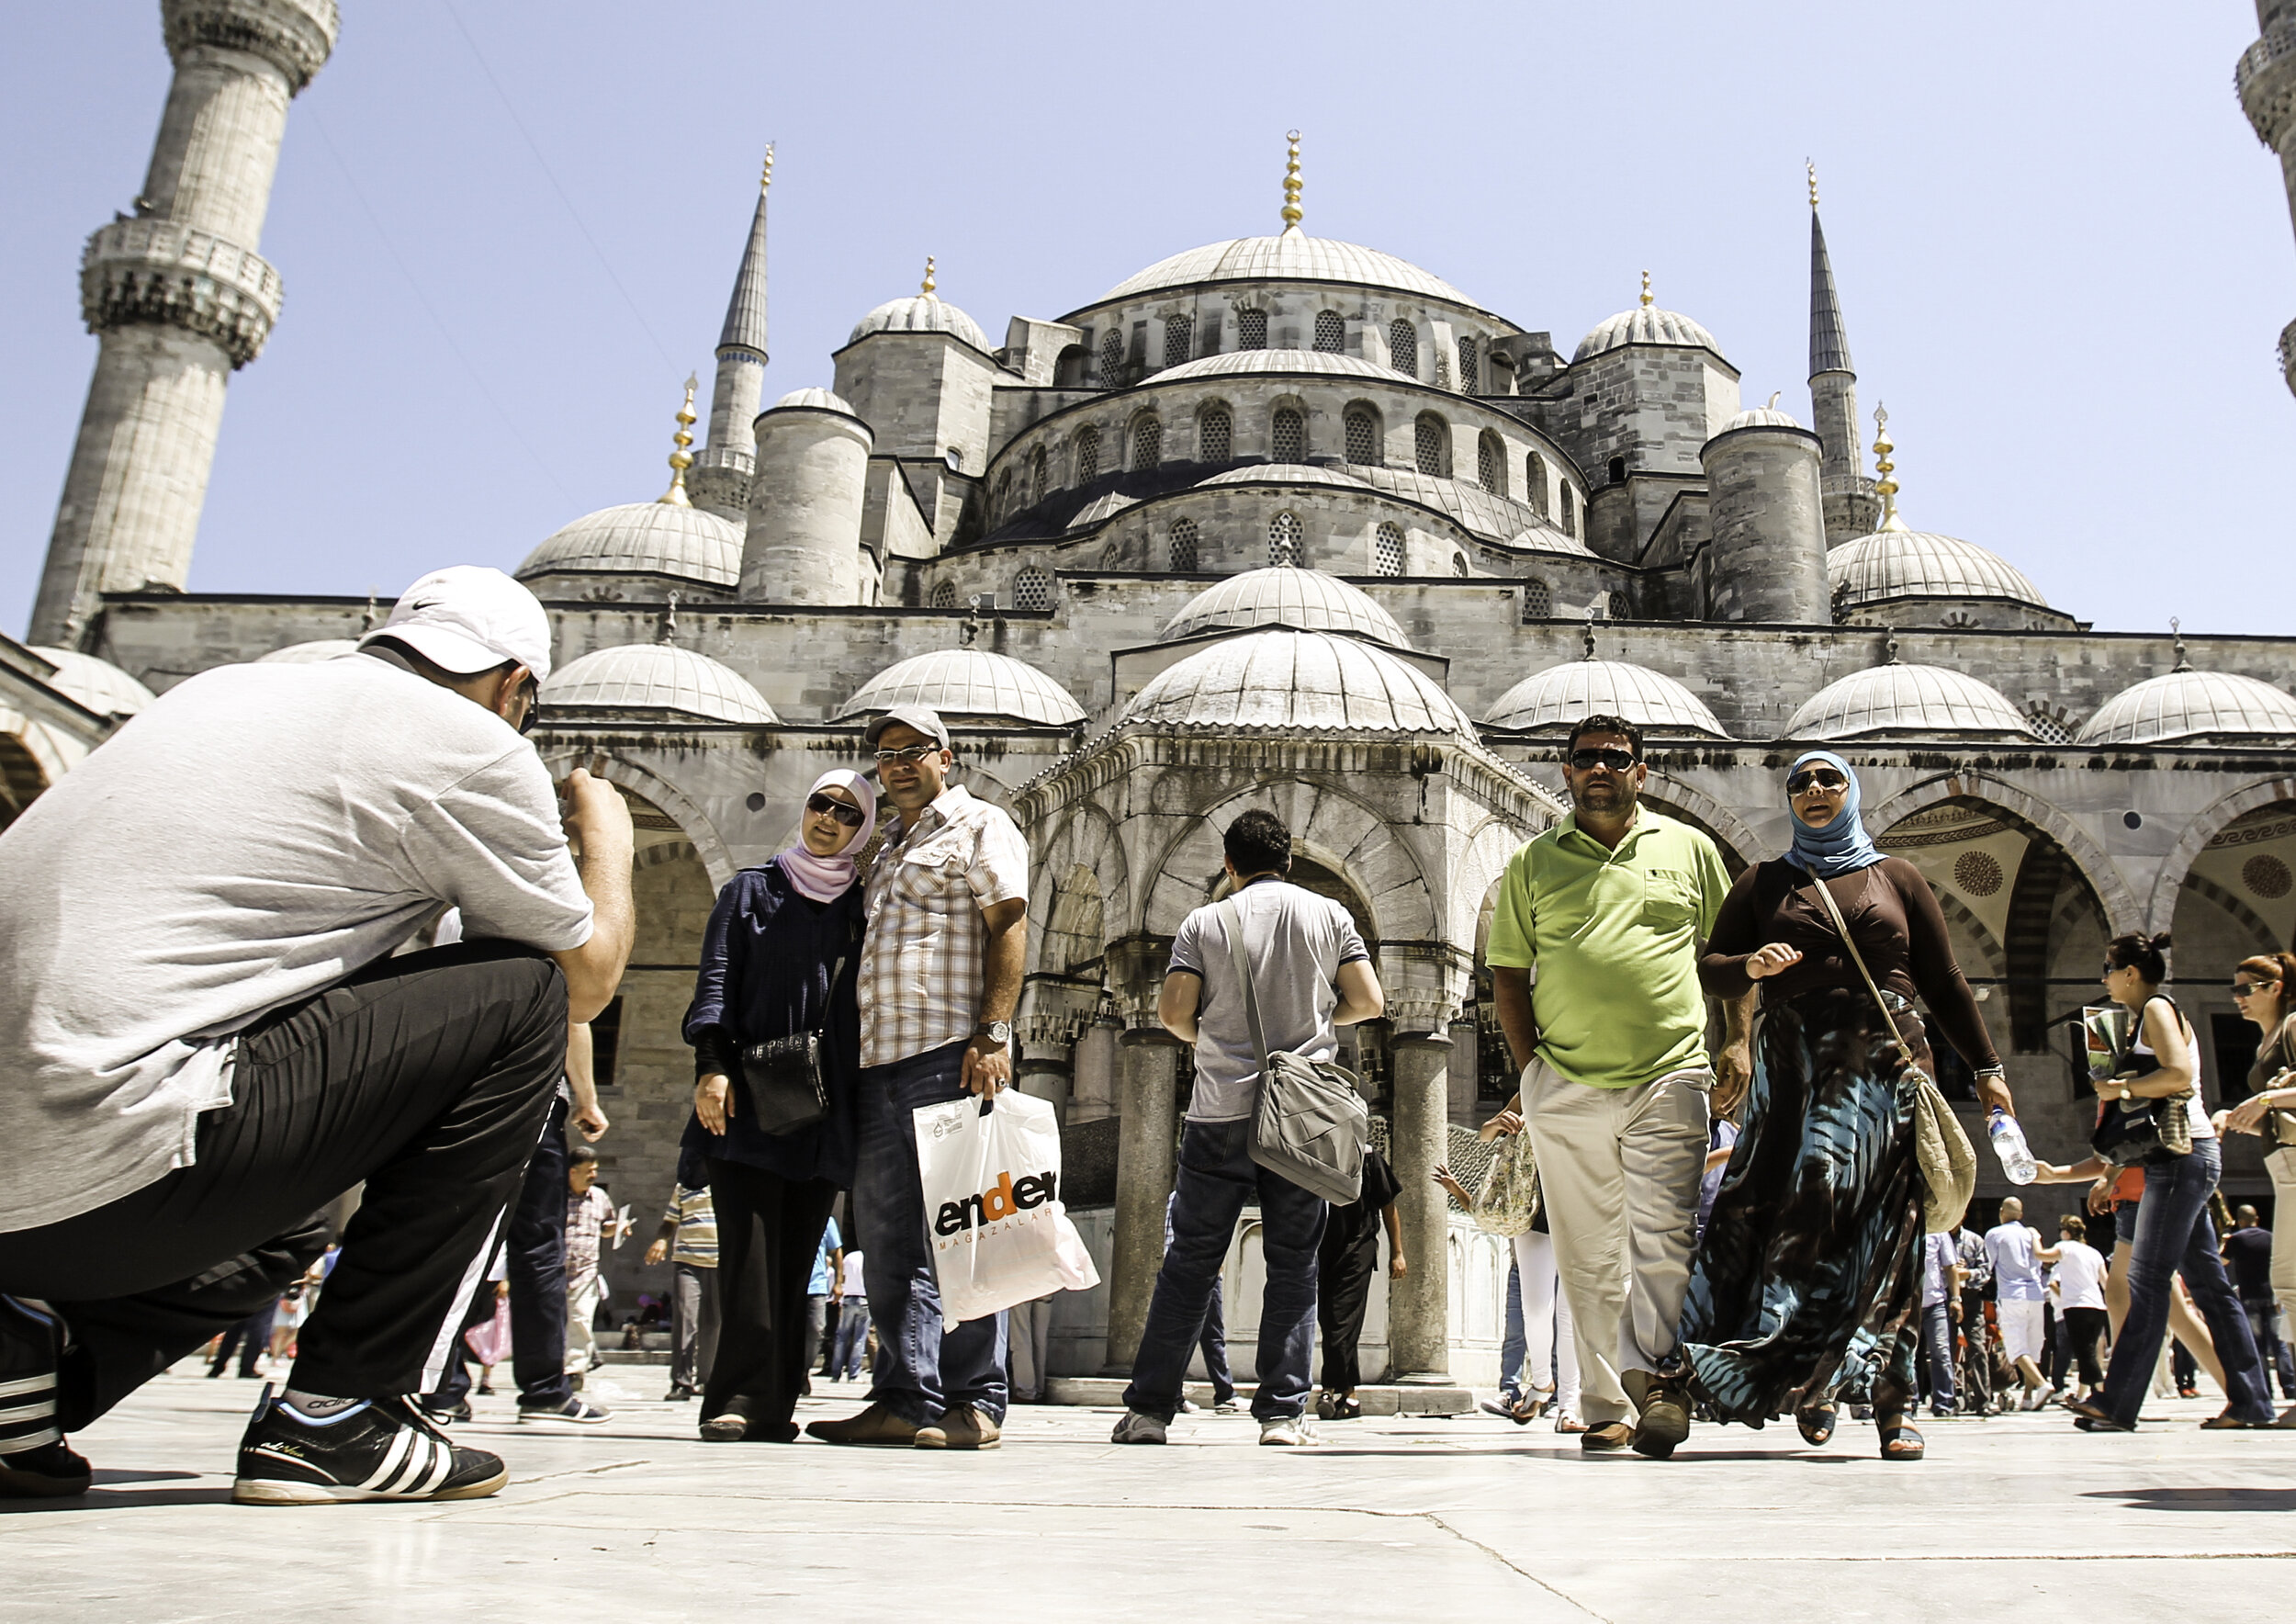 The Blue Mosque, Istanbul - Turkey / 2012